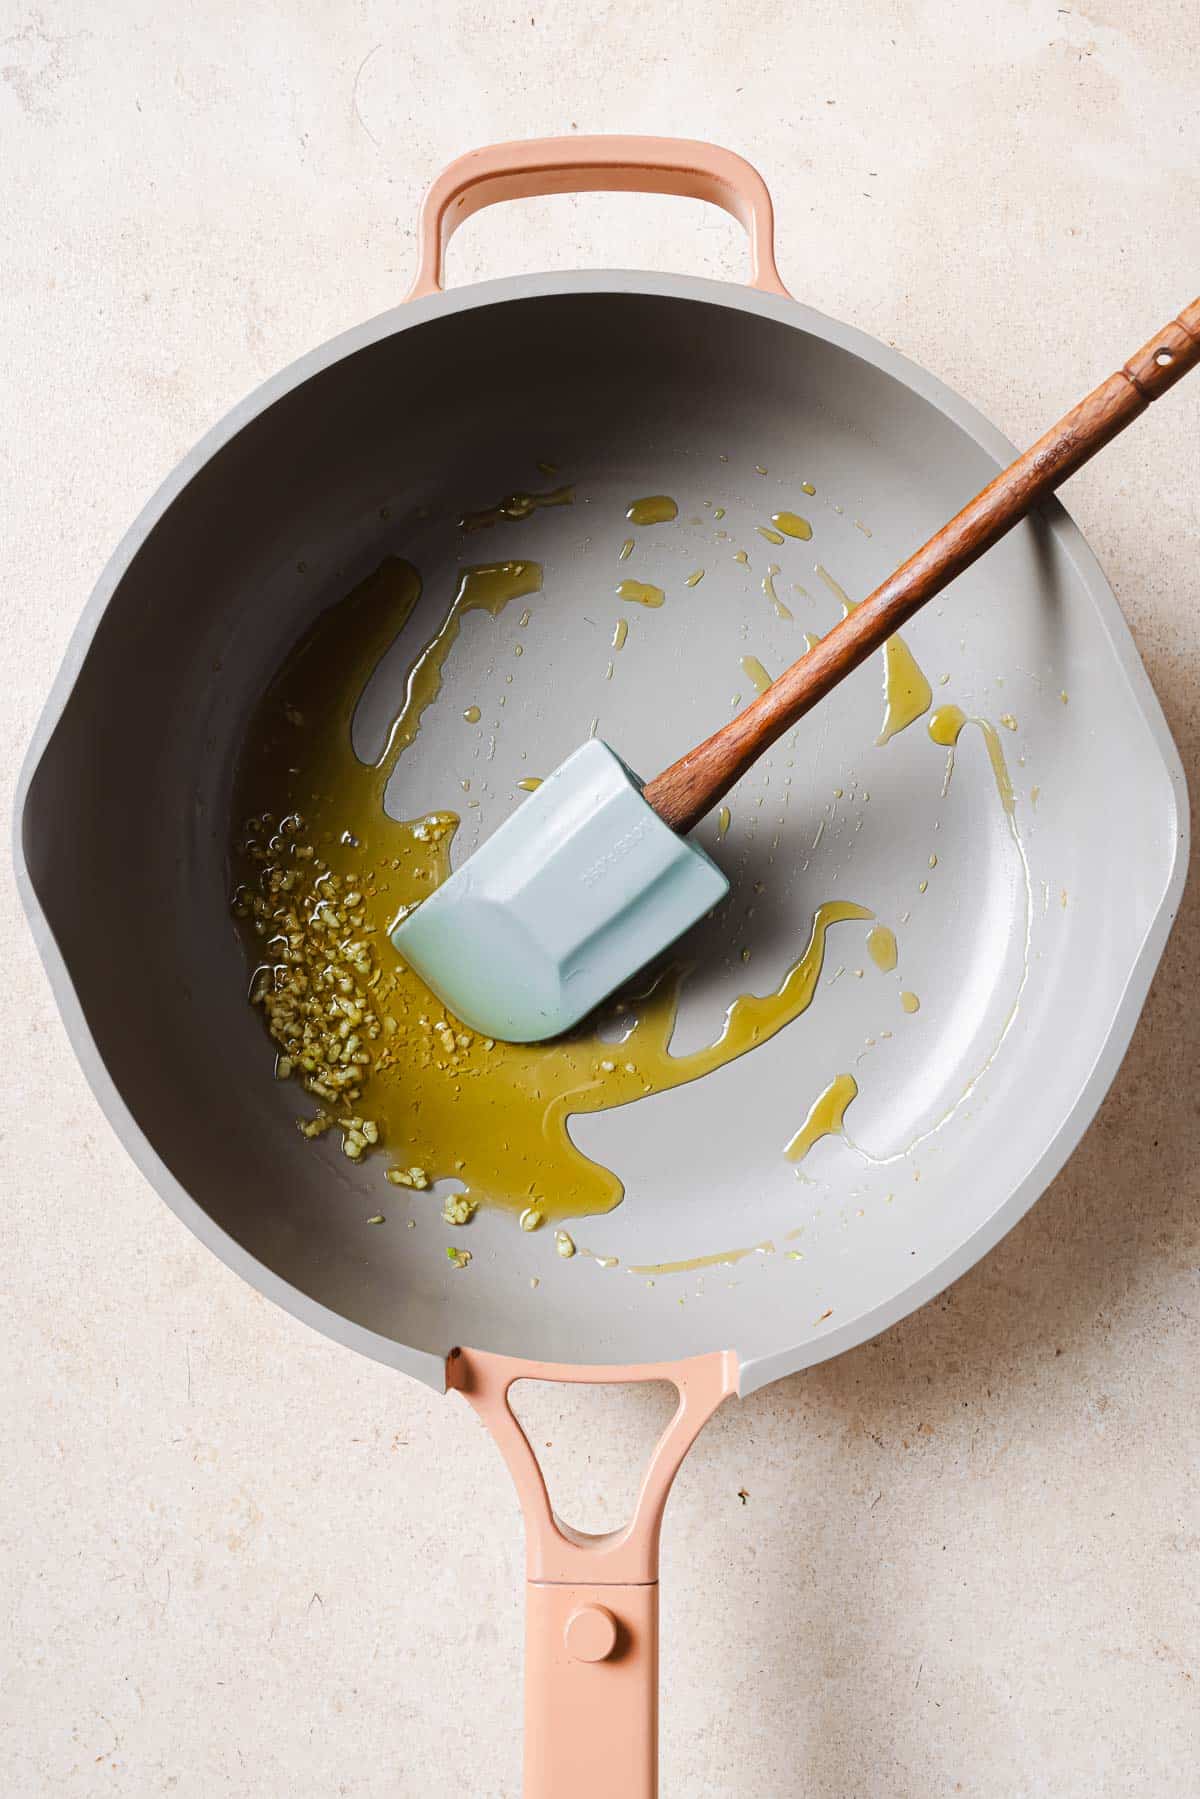 A frying pan with olive oil, garlic, and a wooden spatula.